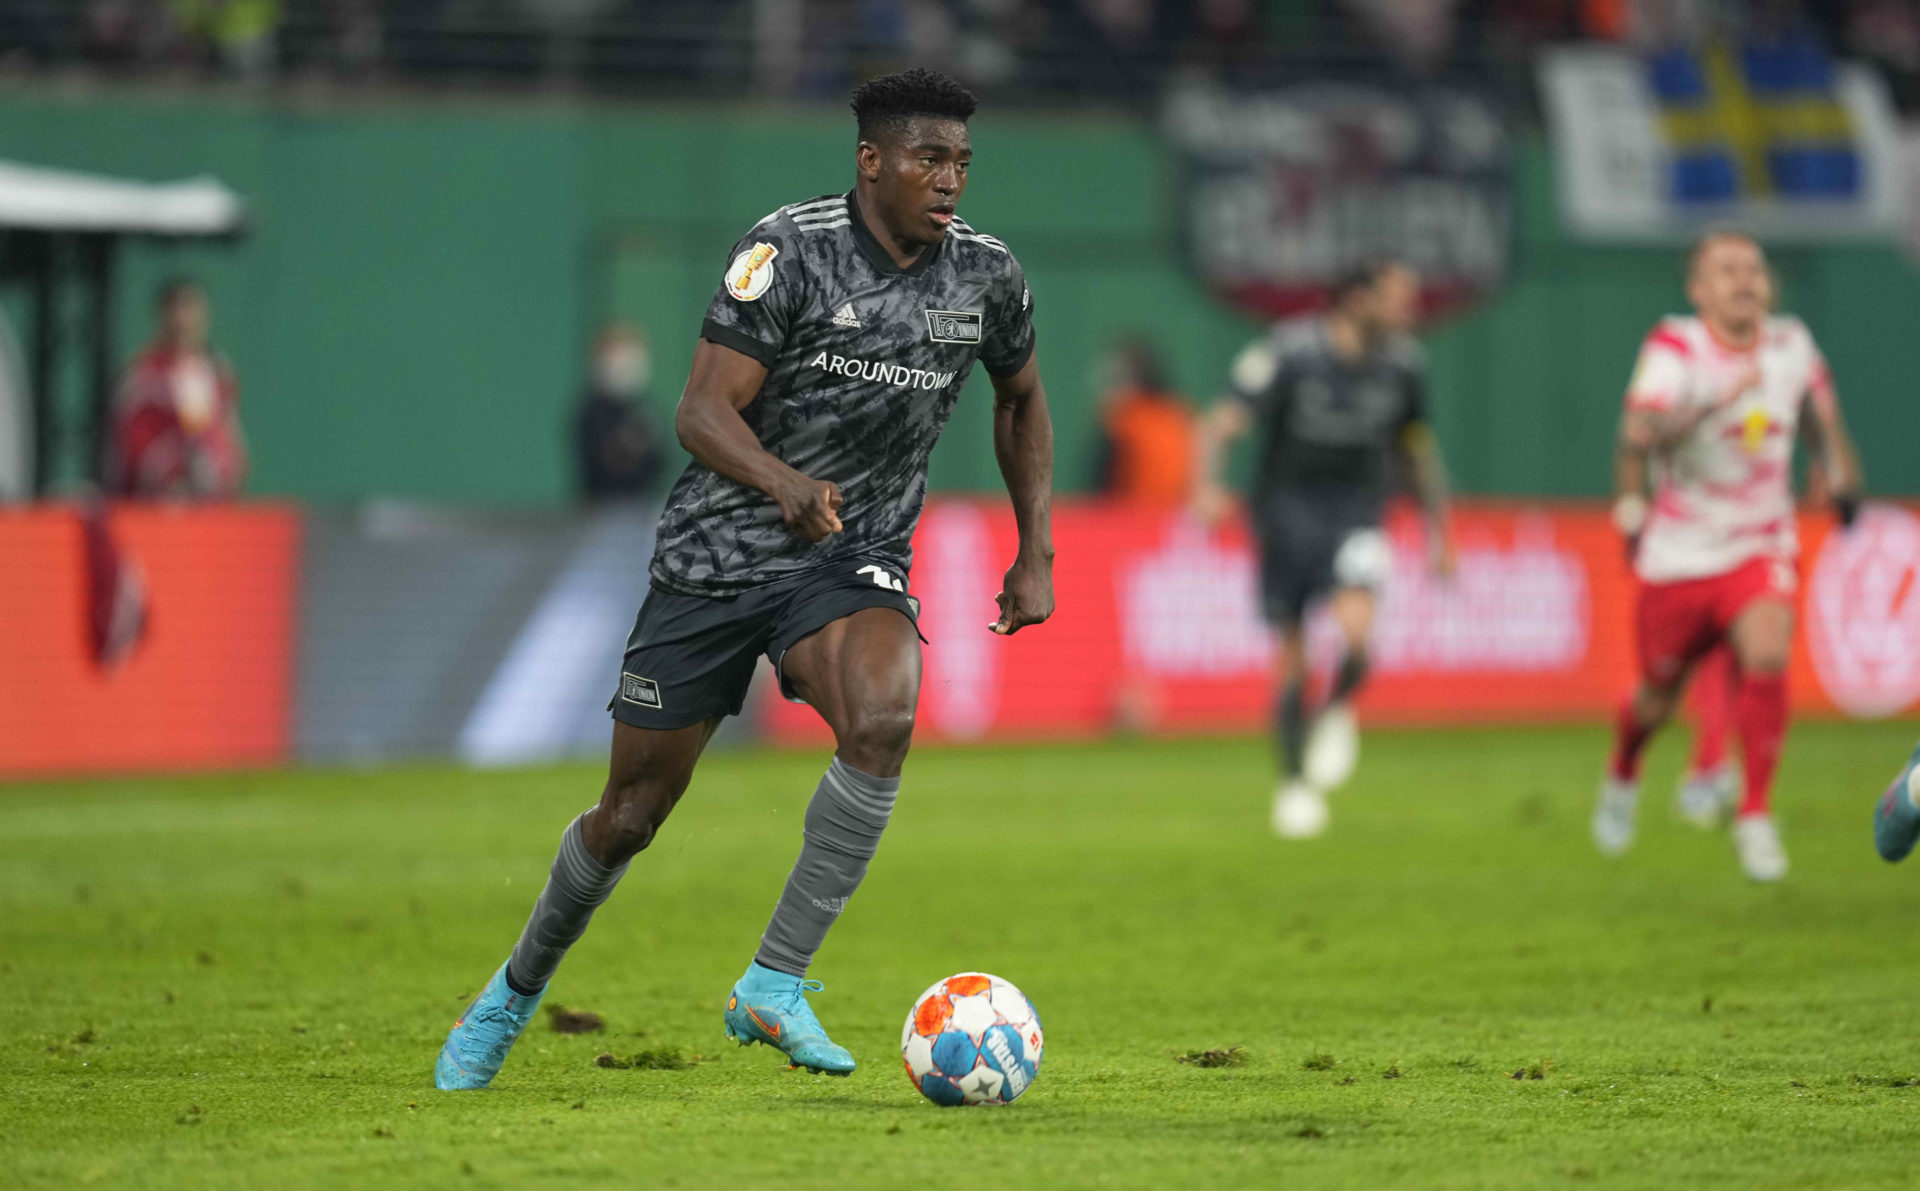 West Ham reportedly must pay £16.7 million if we want to sign Taiwo Awoniyi in the summer